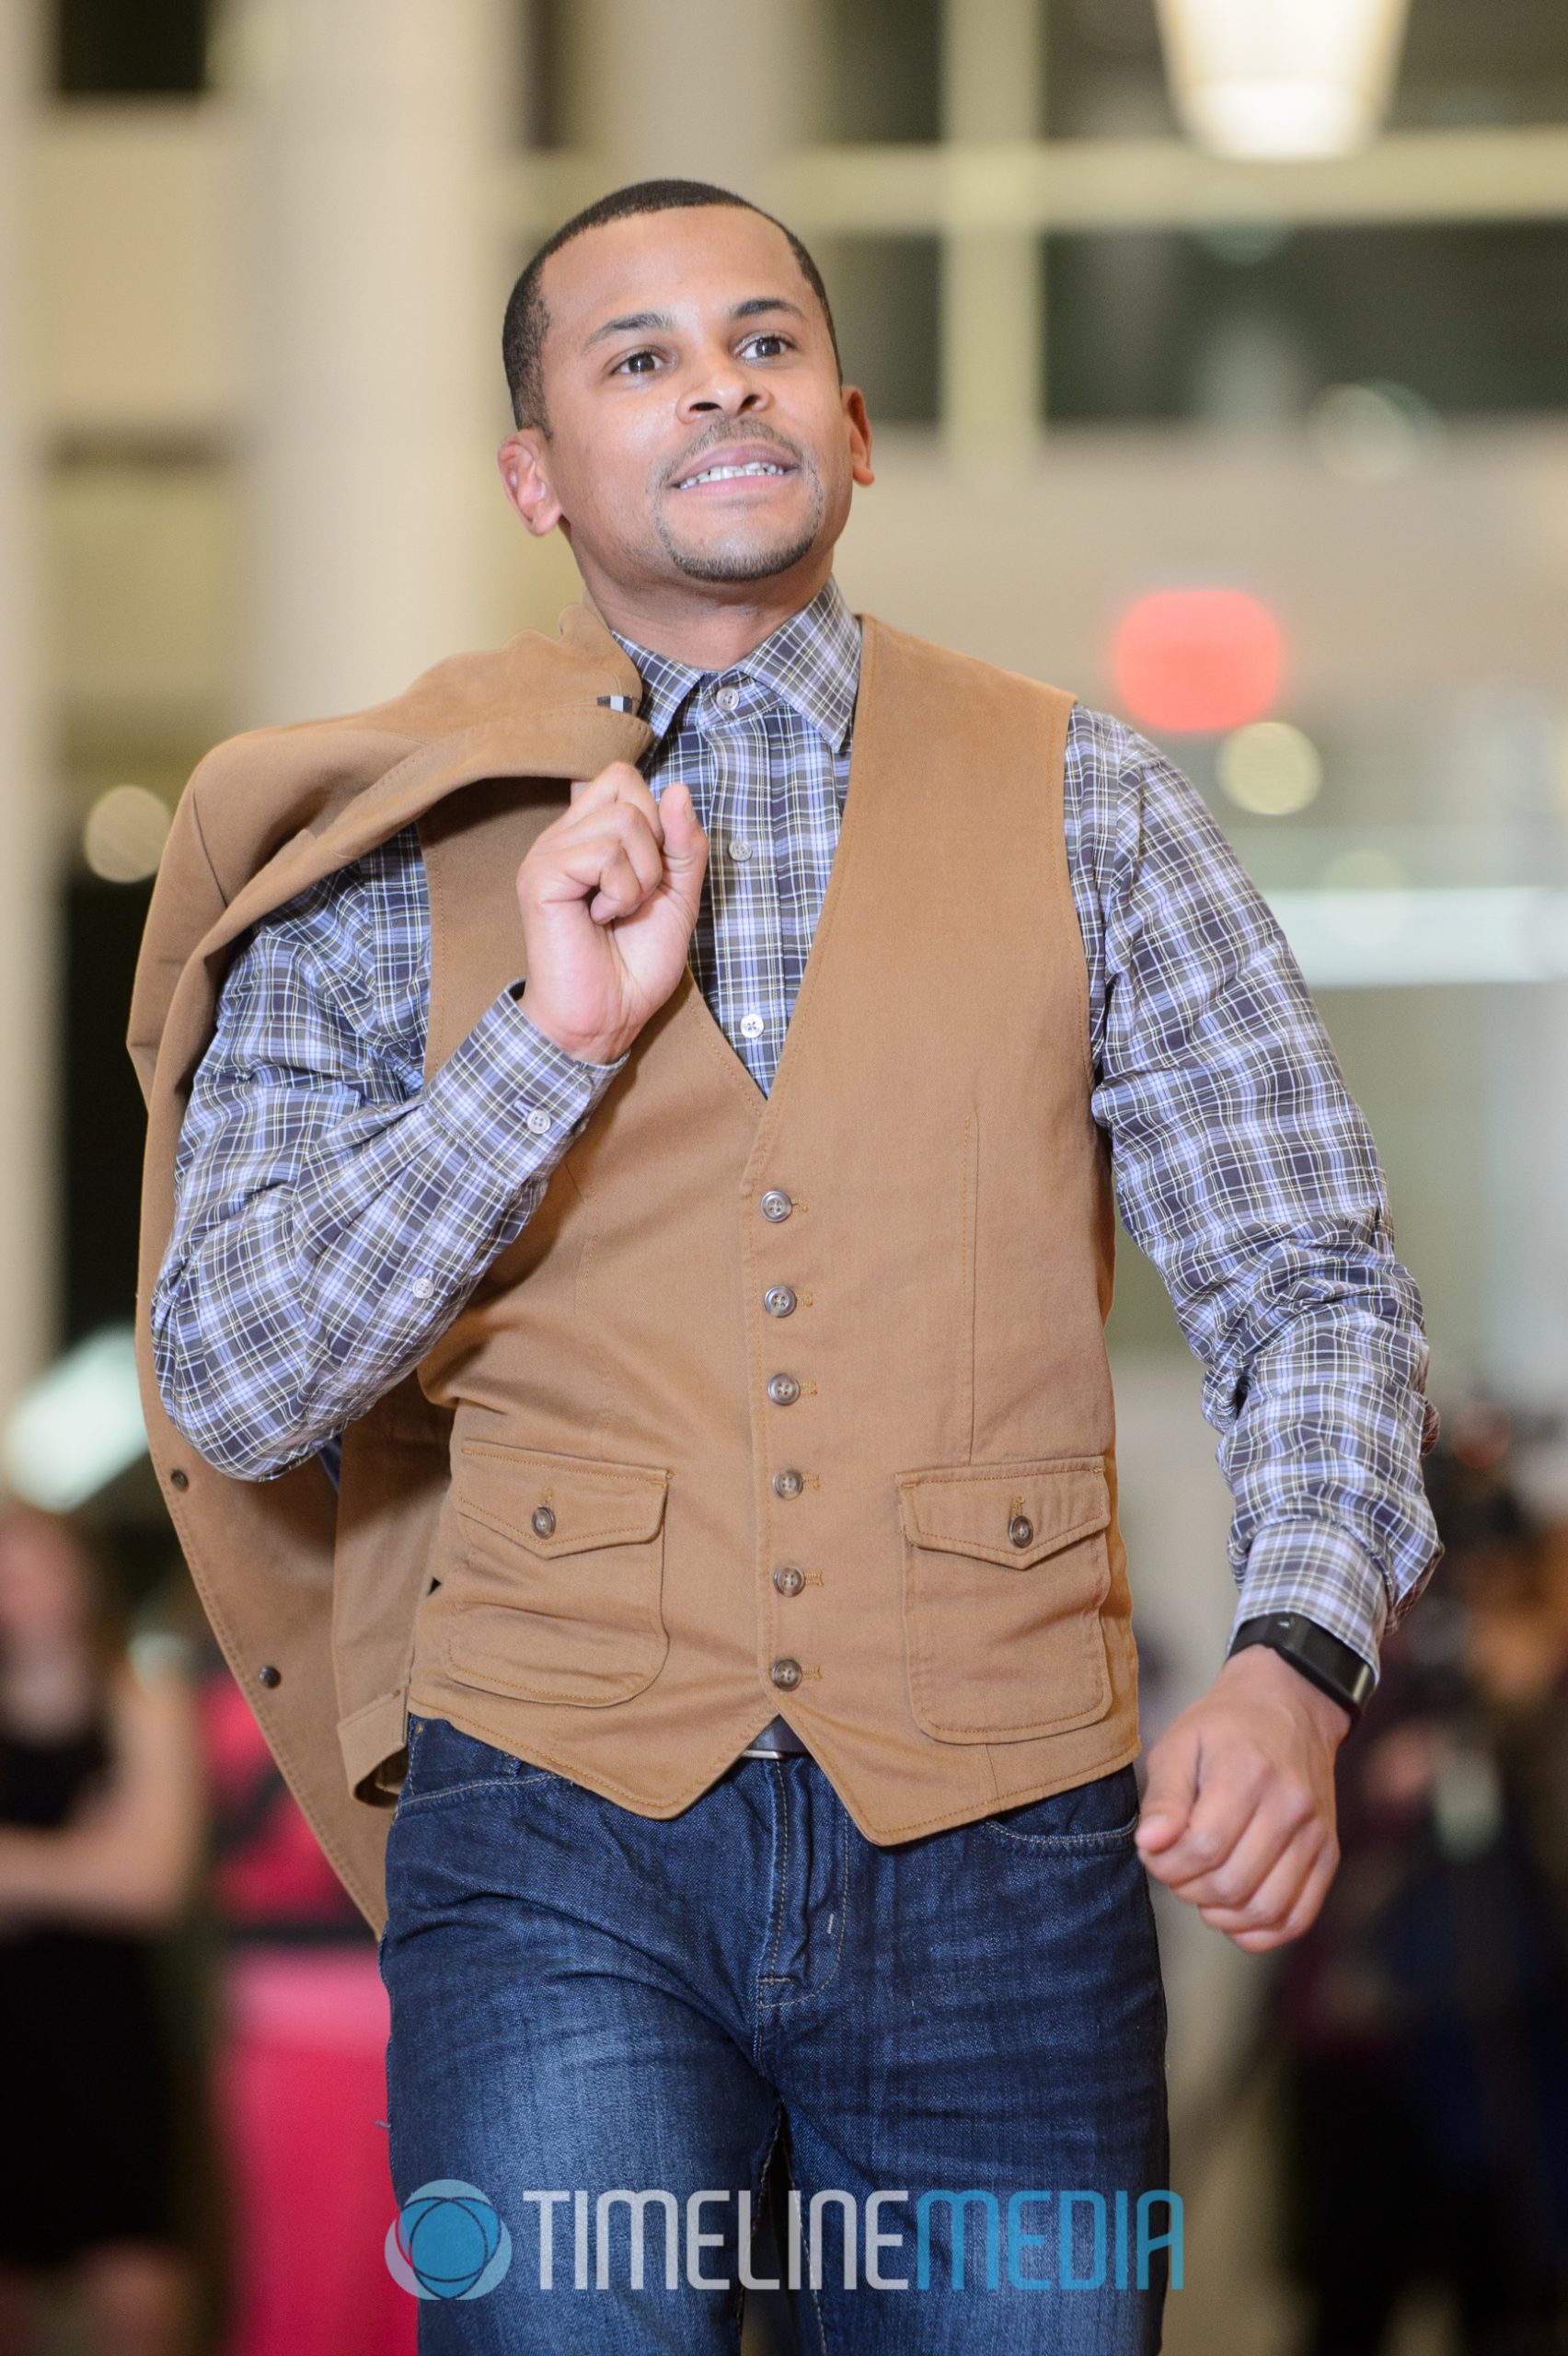 Runway model at the Tysons Corner Center Lord and Taylor holiday fashion show 